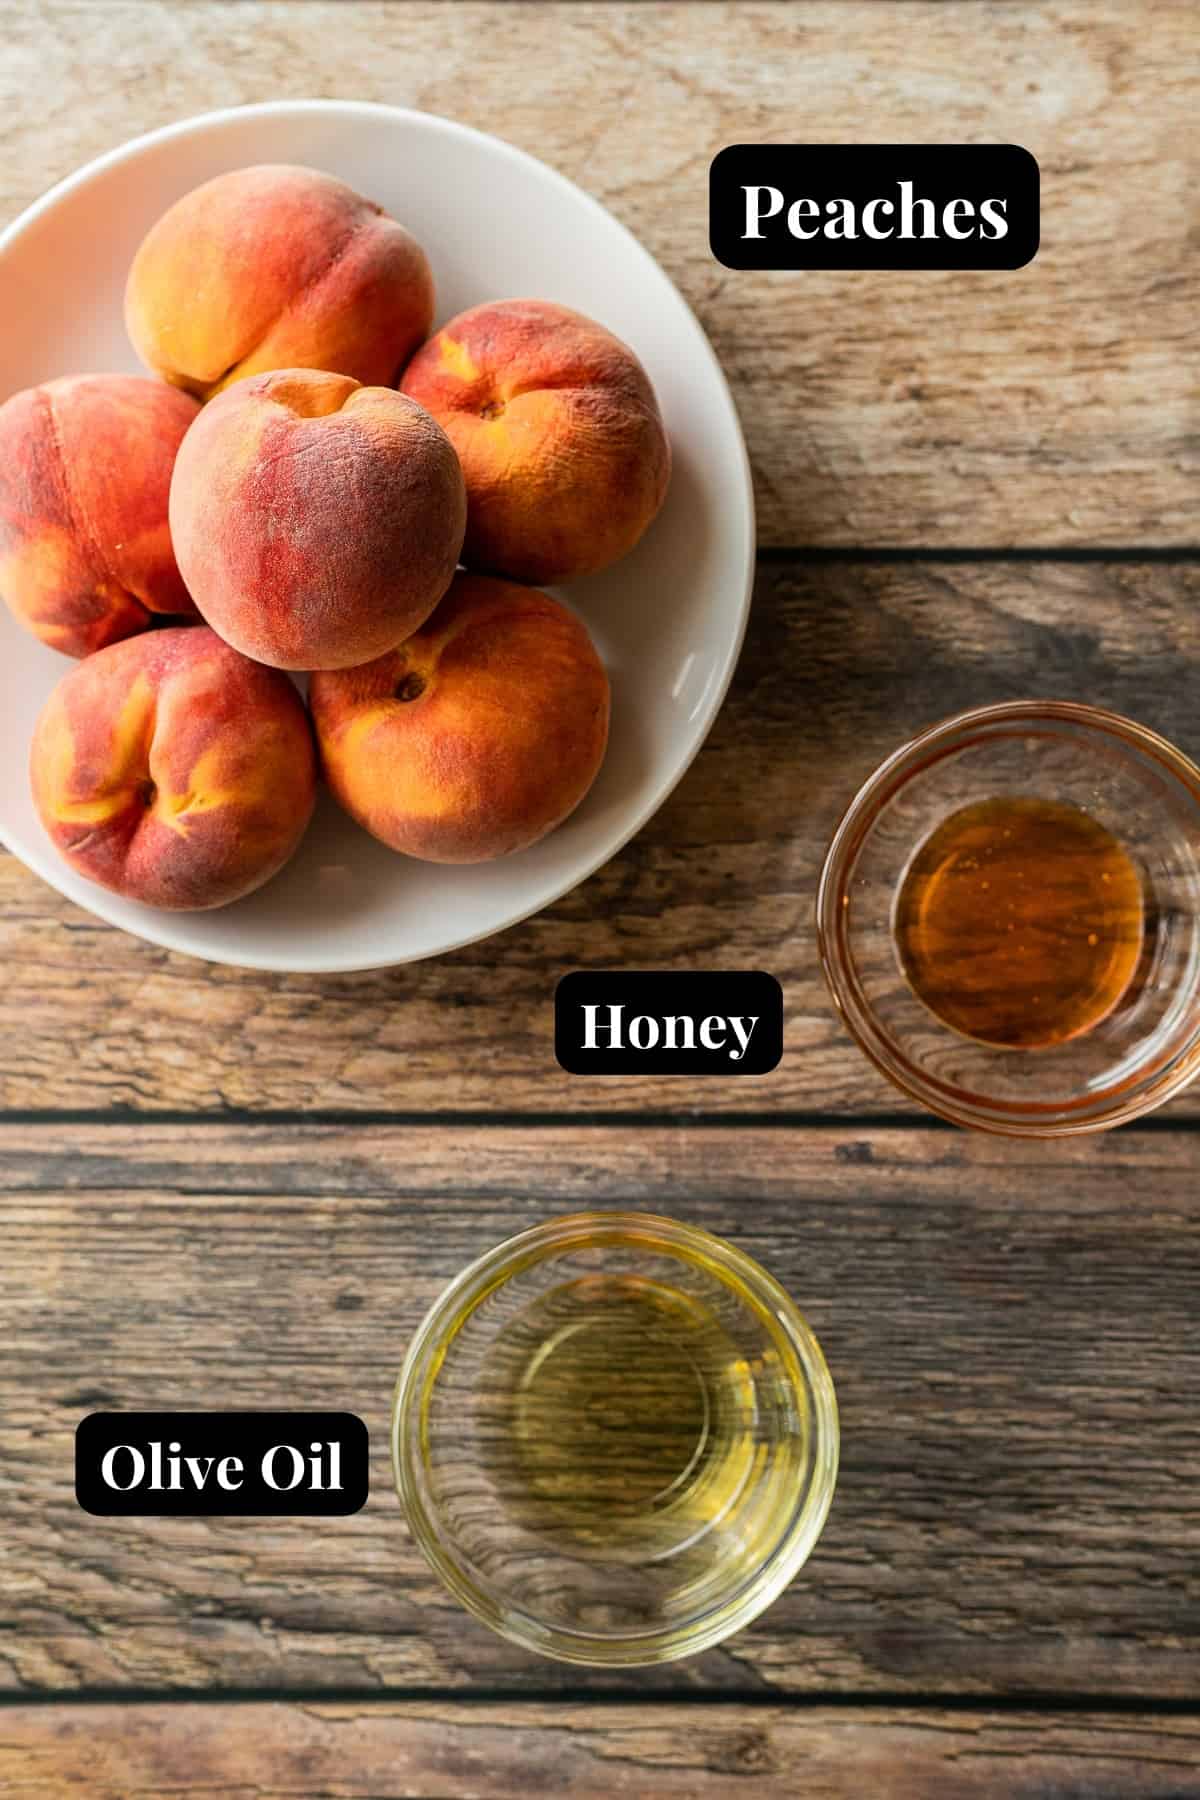 The ingredients needed for grilled peaches on a wood background.